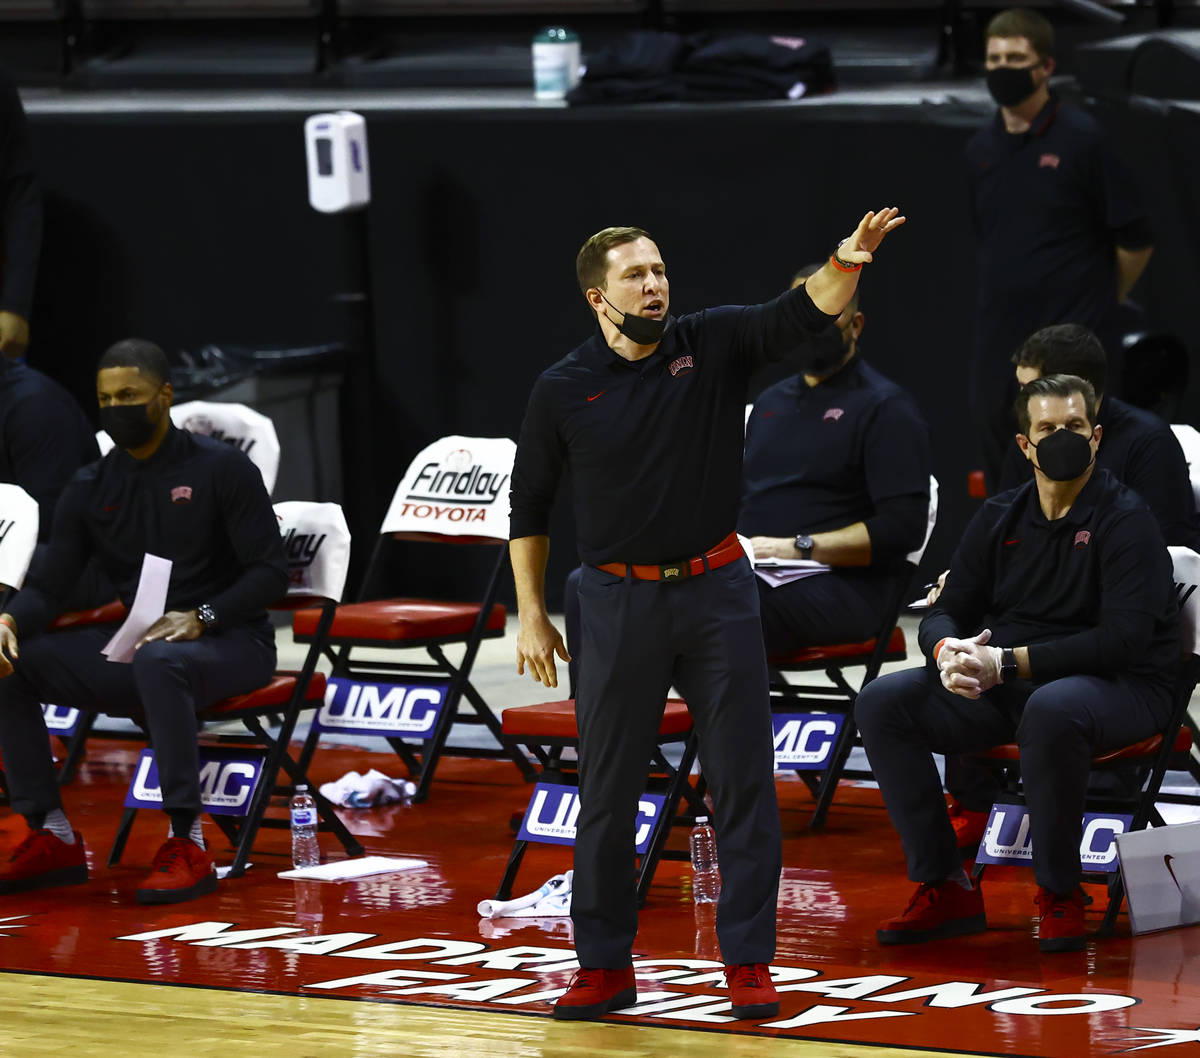 UNLV Rebels head coach T.J. Otzelberger motions to his team during the first half of a basketba ...